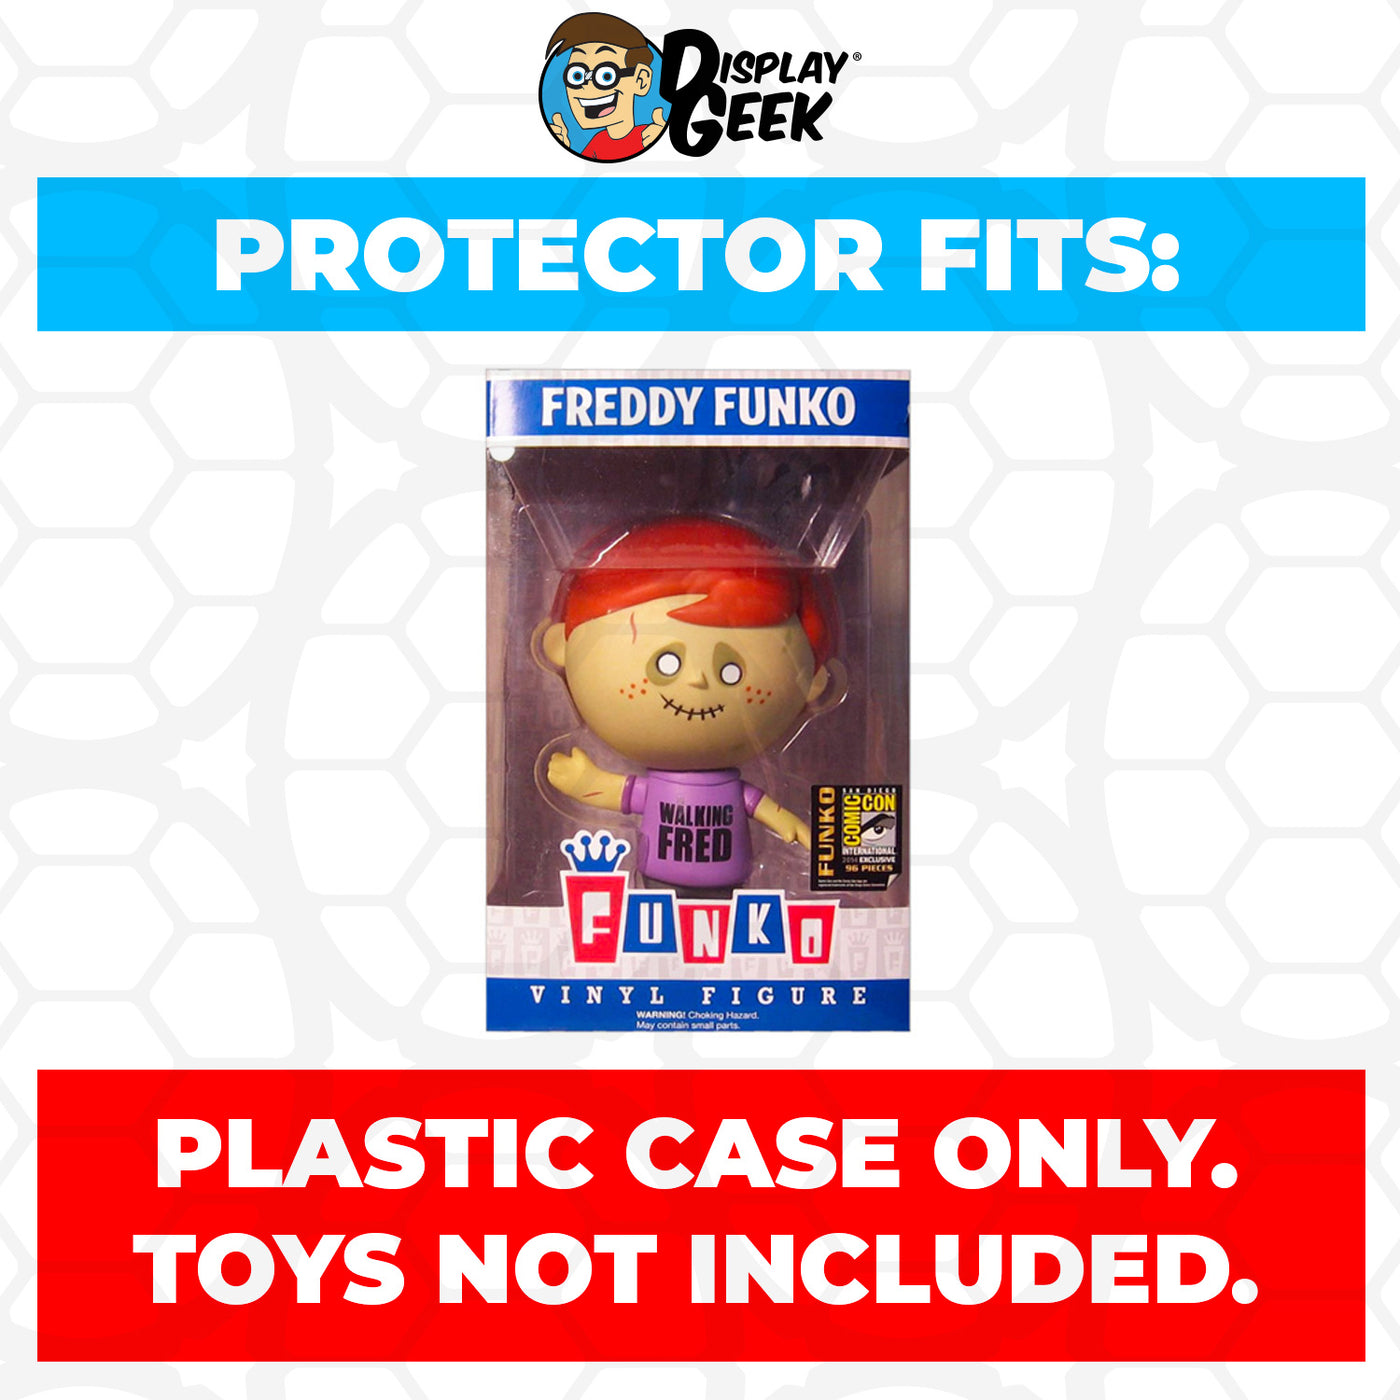 Pop Protector for Freddy Funko Walking Fred SDCC LE 96 on The Protector Guide App by Display Geek